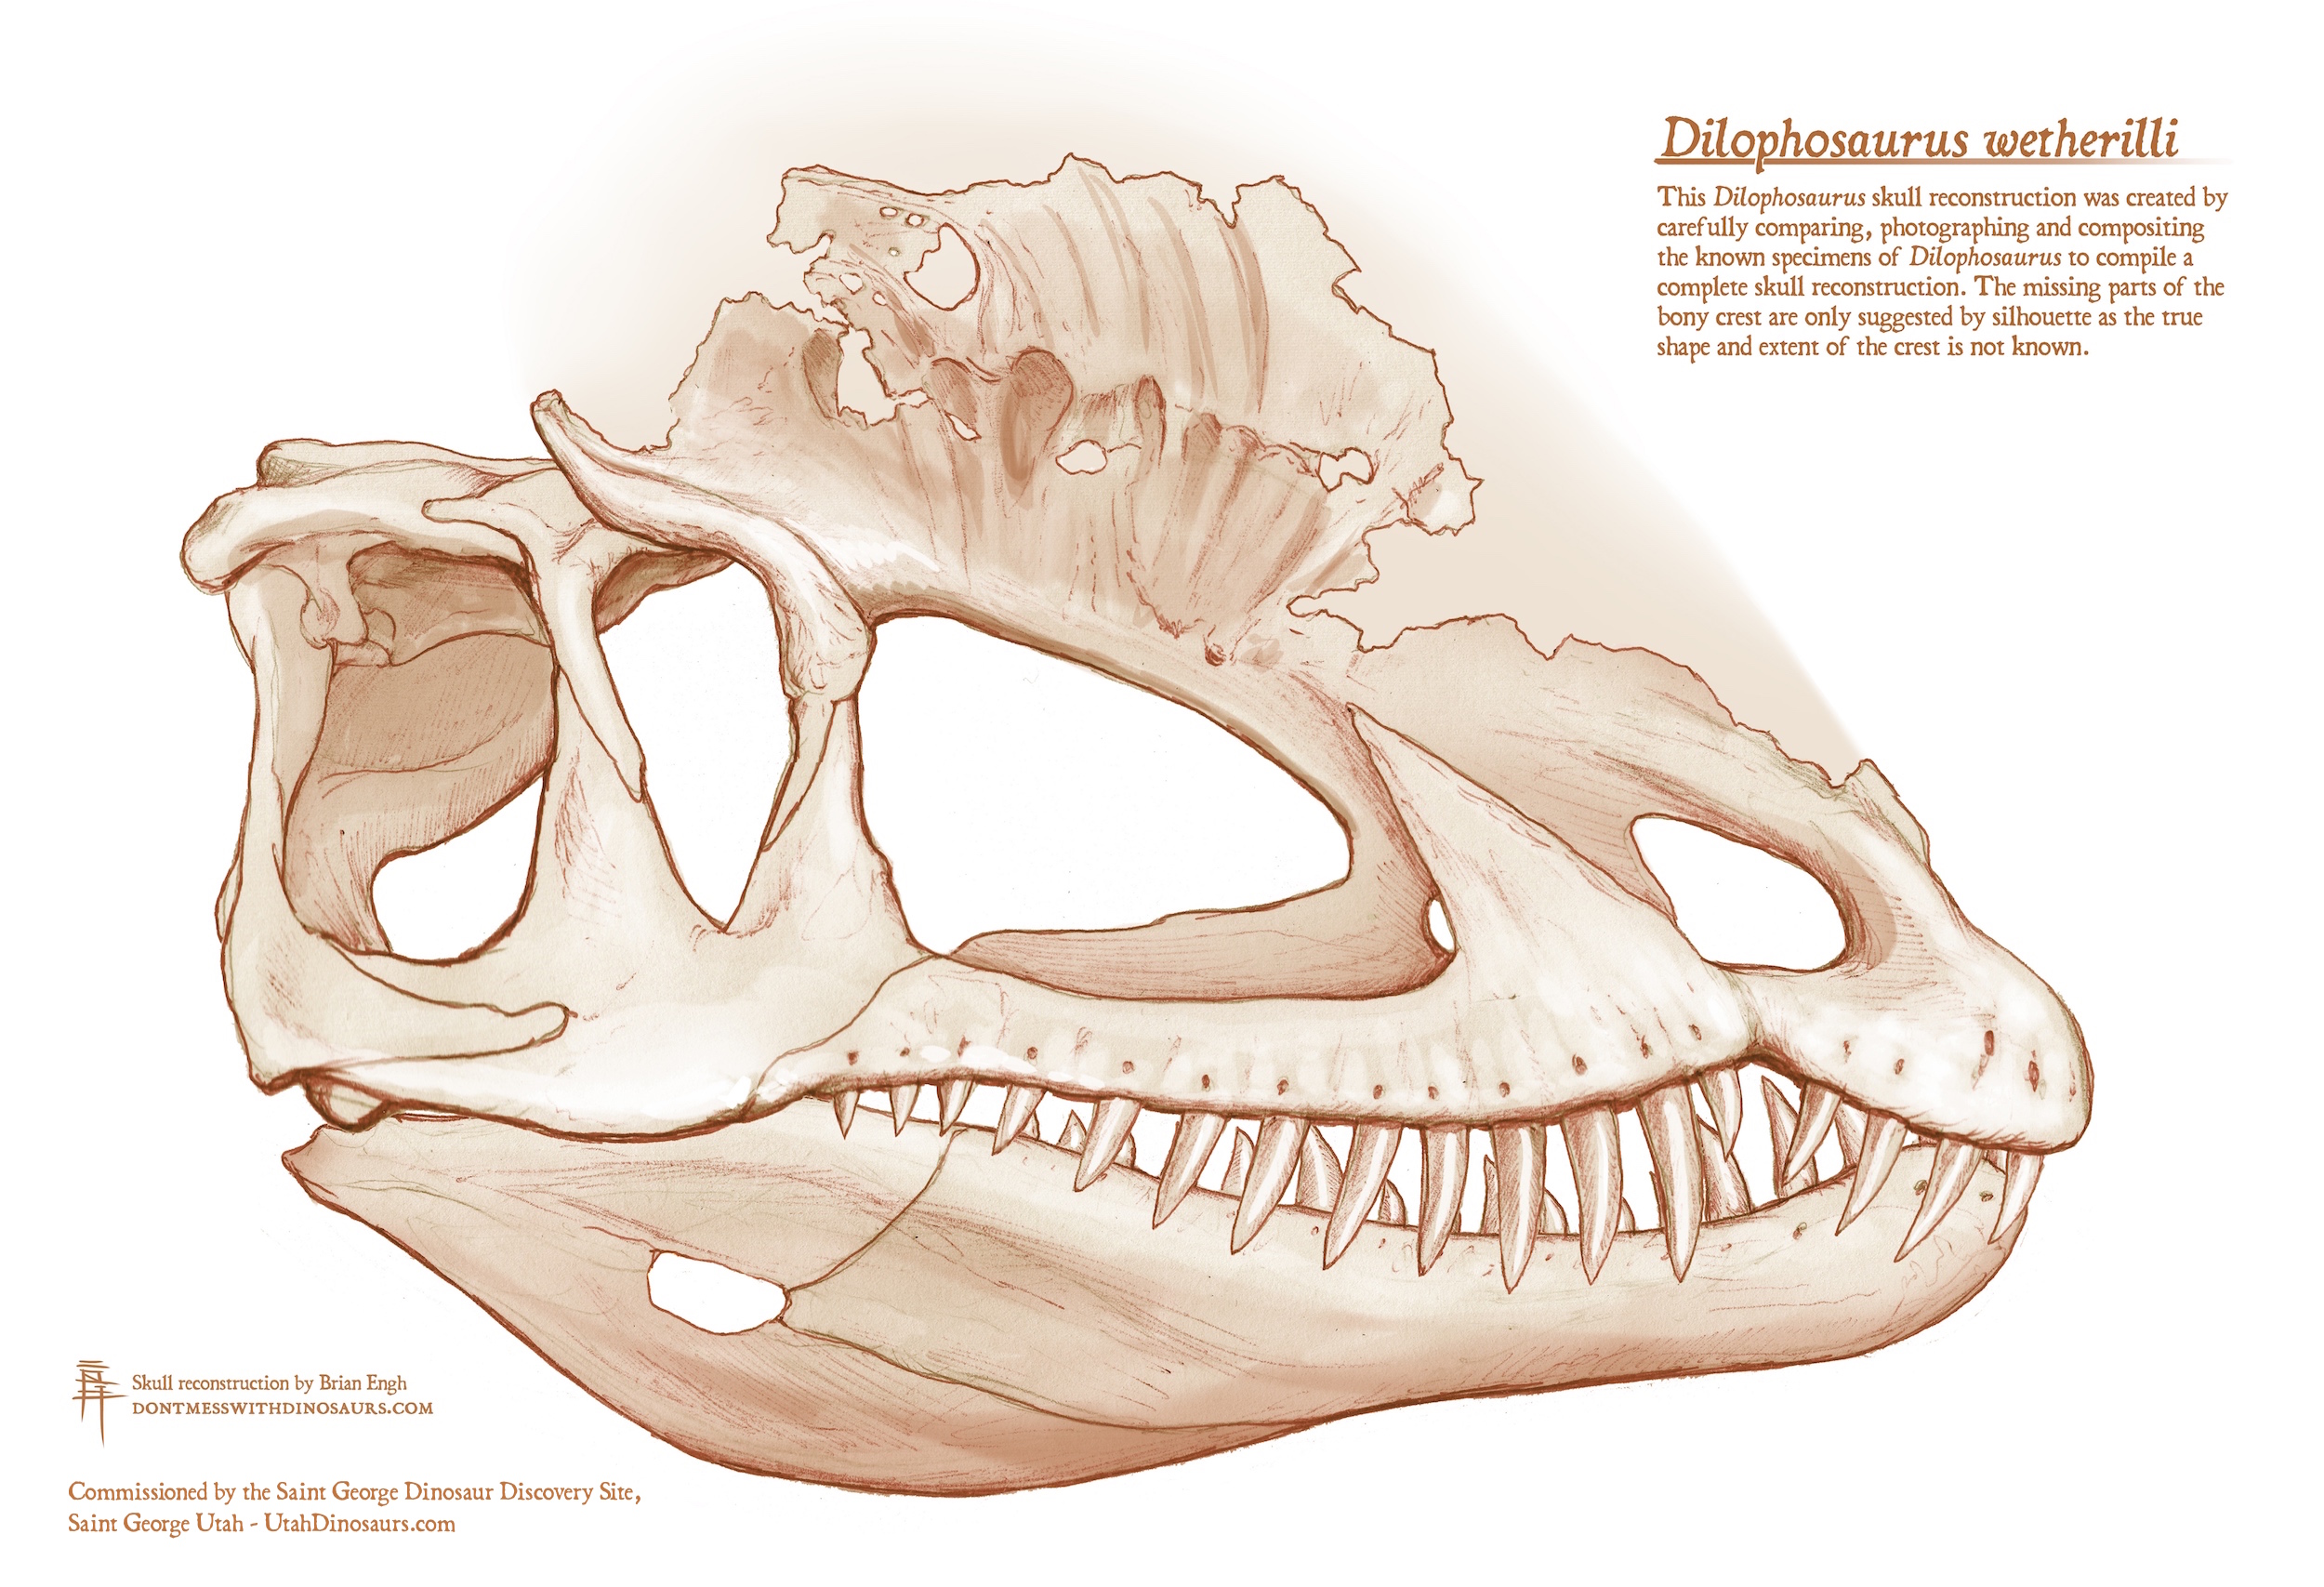 The skull in profile shows sharp teeth and heavy bone growths on the top 